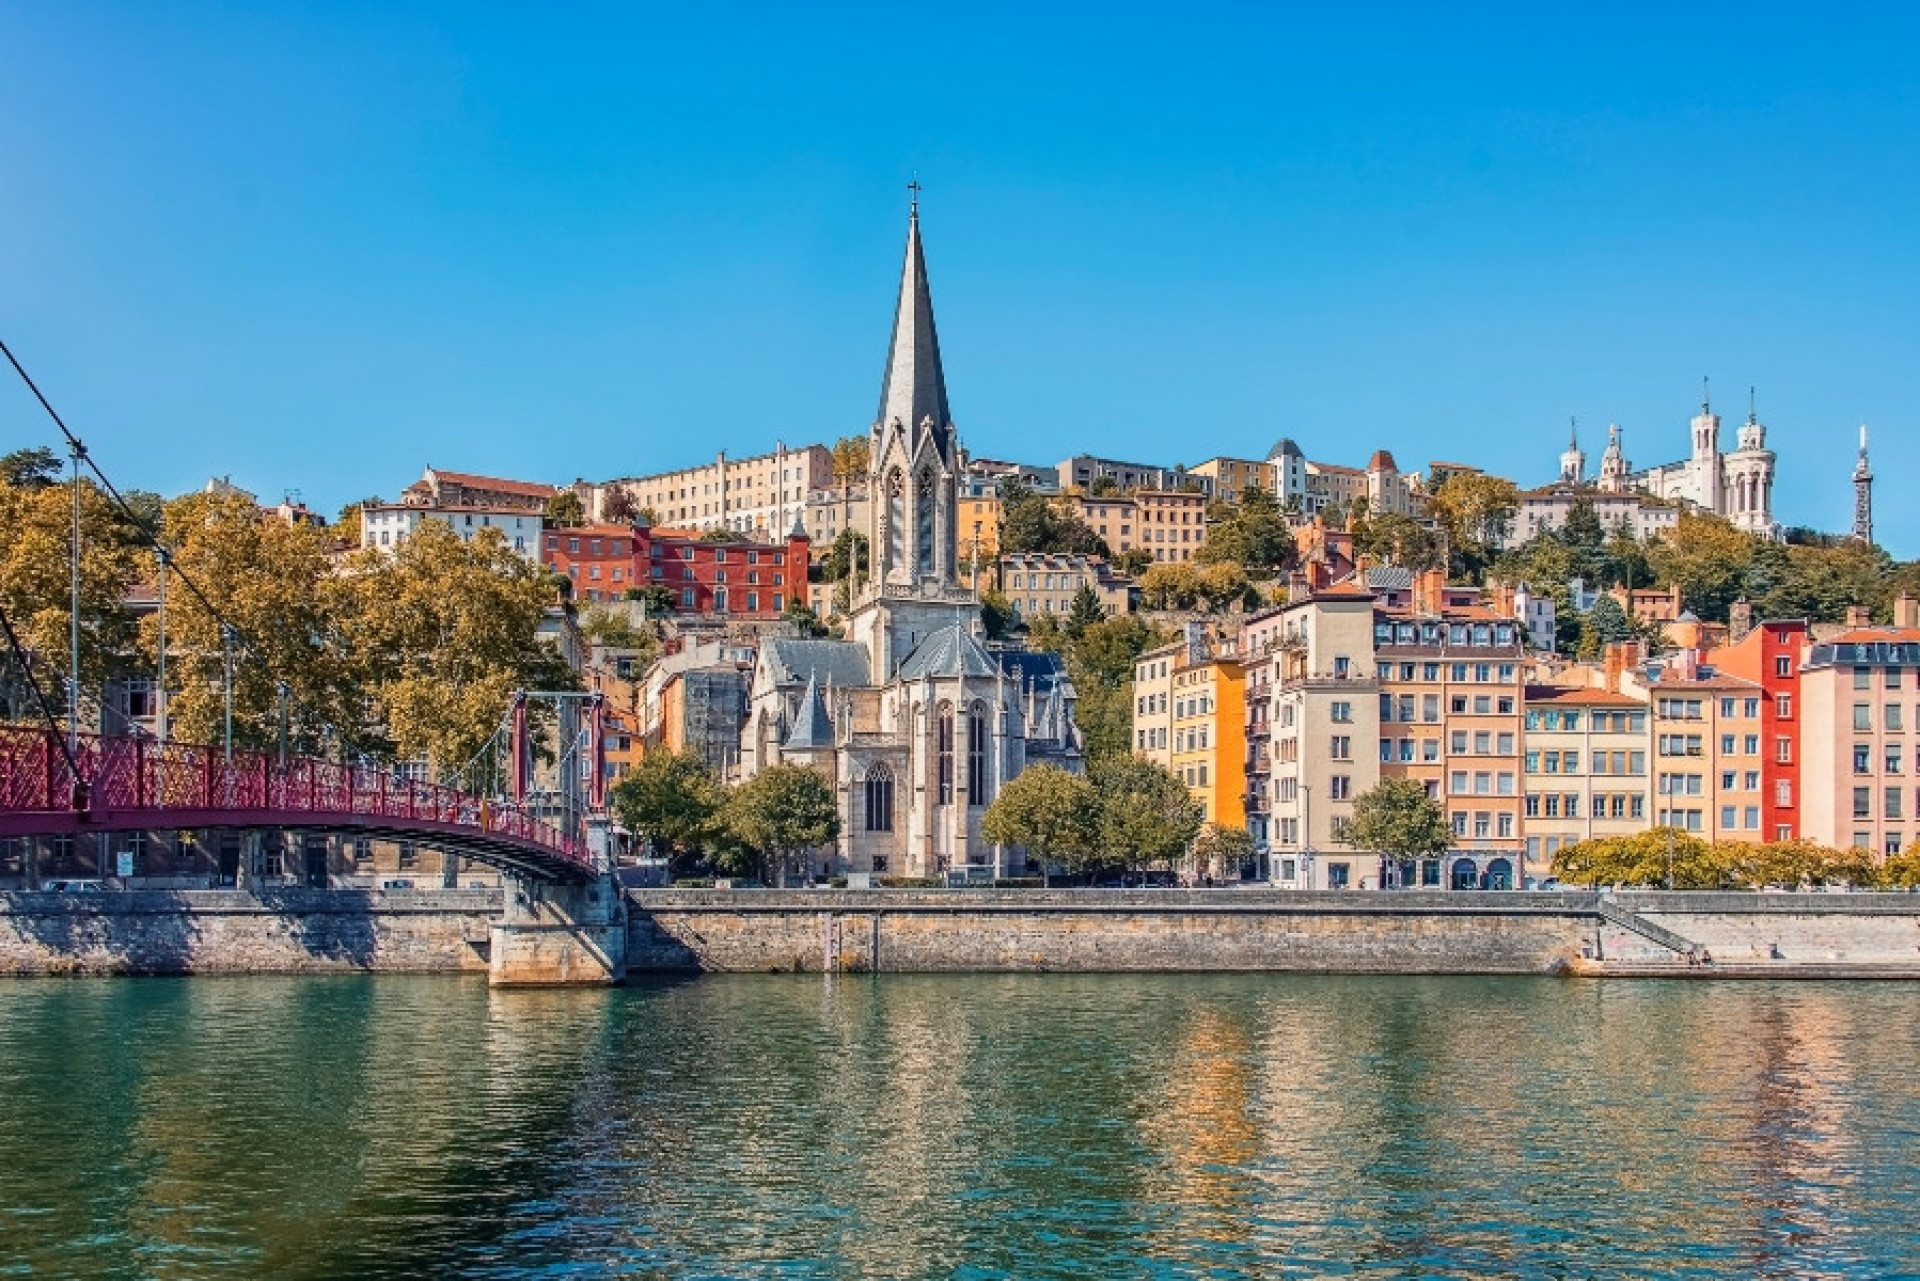 <p>With one of the top healthcare systems and the second-largest economy in the European Union, France's citizens continue to thrive in terms of longevity.</p><p><a href="https://www.msn.com/en-us/community/channel/vid-7xx8mnucu55yw63we9va2gwr7uihbxwc68fxqp25x6tg4ftibpra?cvid=94631541bc0f4f89bfd59158d696ad7e">Follow us and access great exclusive content every day</a></p>